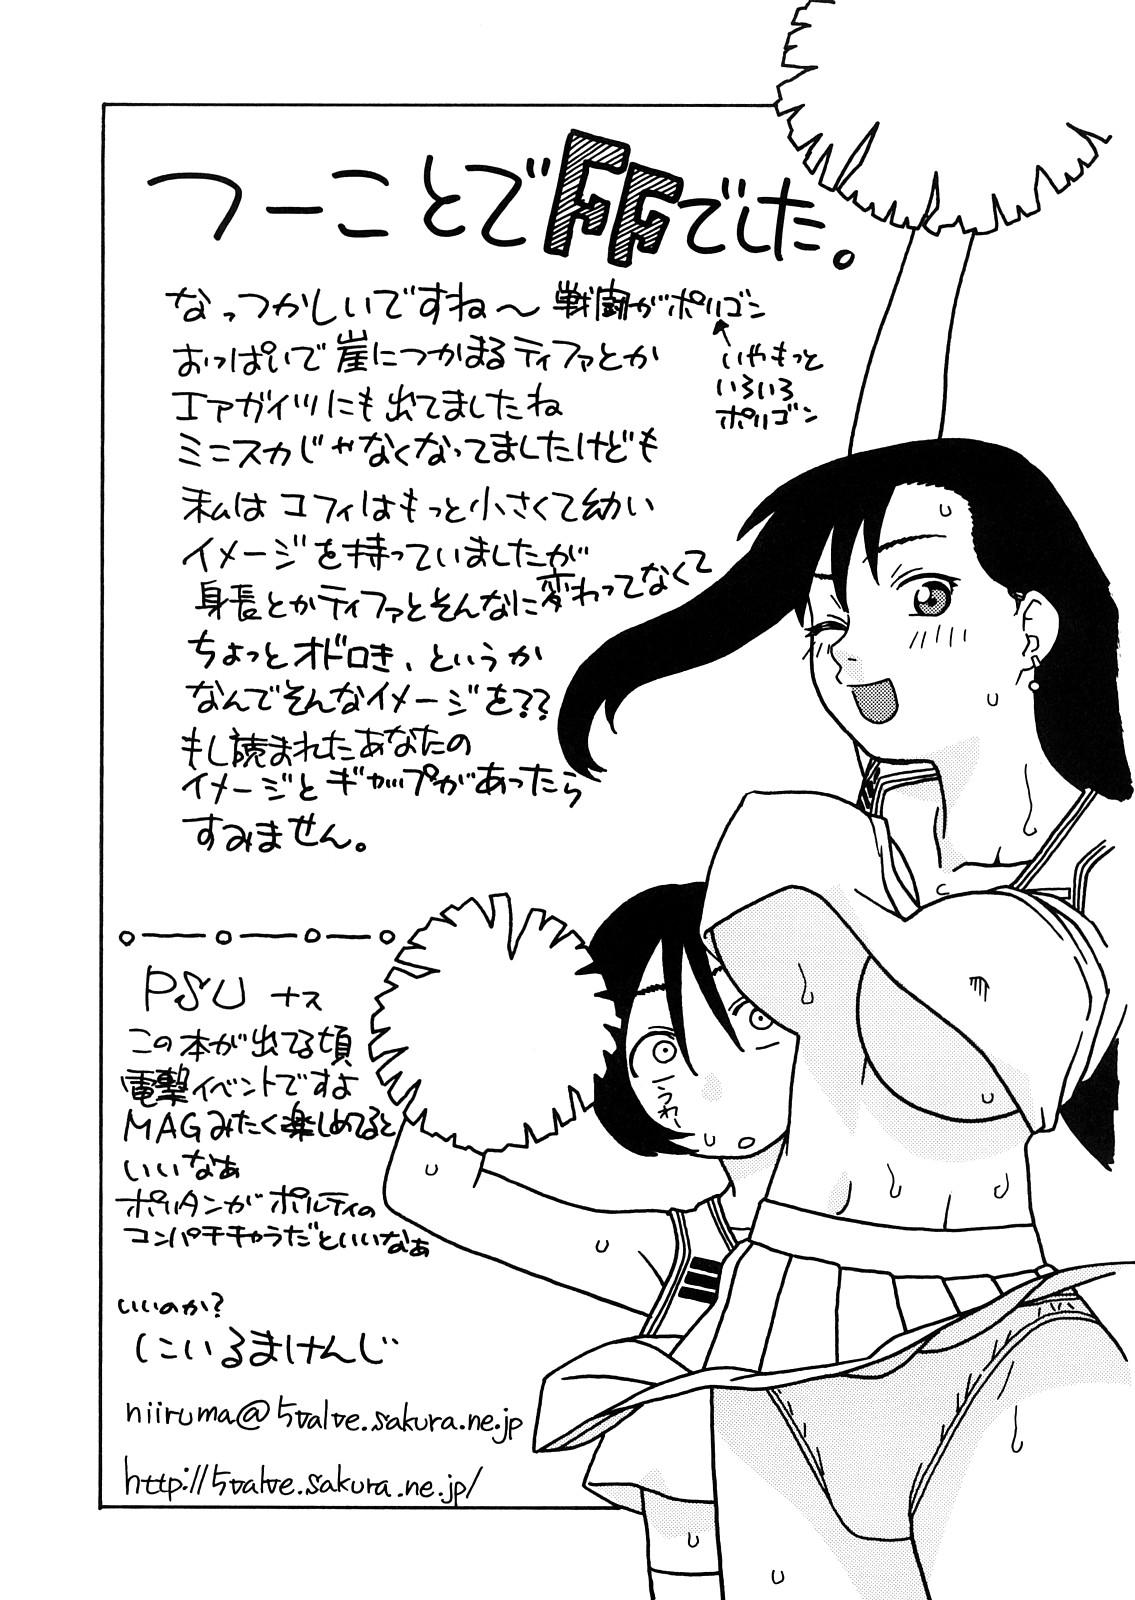 Huge Dick Tifa to Yuffie to Yojouhan - Final fantasy vii Porno 18 - Page 32